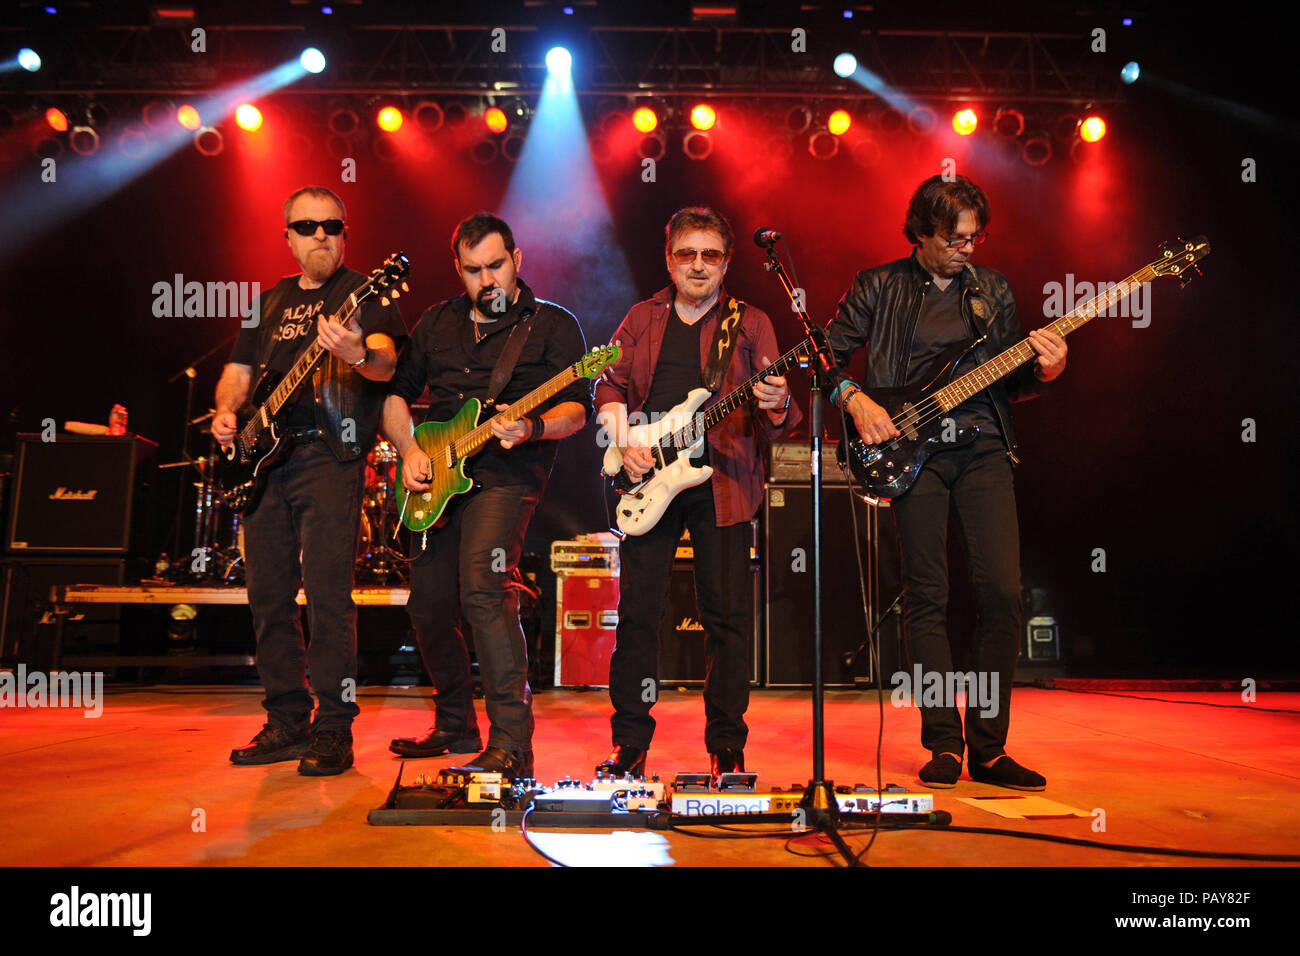 POMPANO BEACH, FL - AUGUST 15: Eric Bloom, Jules Radino and Donald 'Buck Dharma' Roeser of Blue Oyster Cult perform at the Pompano Beach Ampitheatre on August 15, 2015 in Pompano Beach Florida.   People:  Eric Bloom, Richie Castellano, Donald Roeser, Kasim Sulton Stock Photo